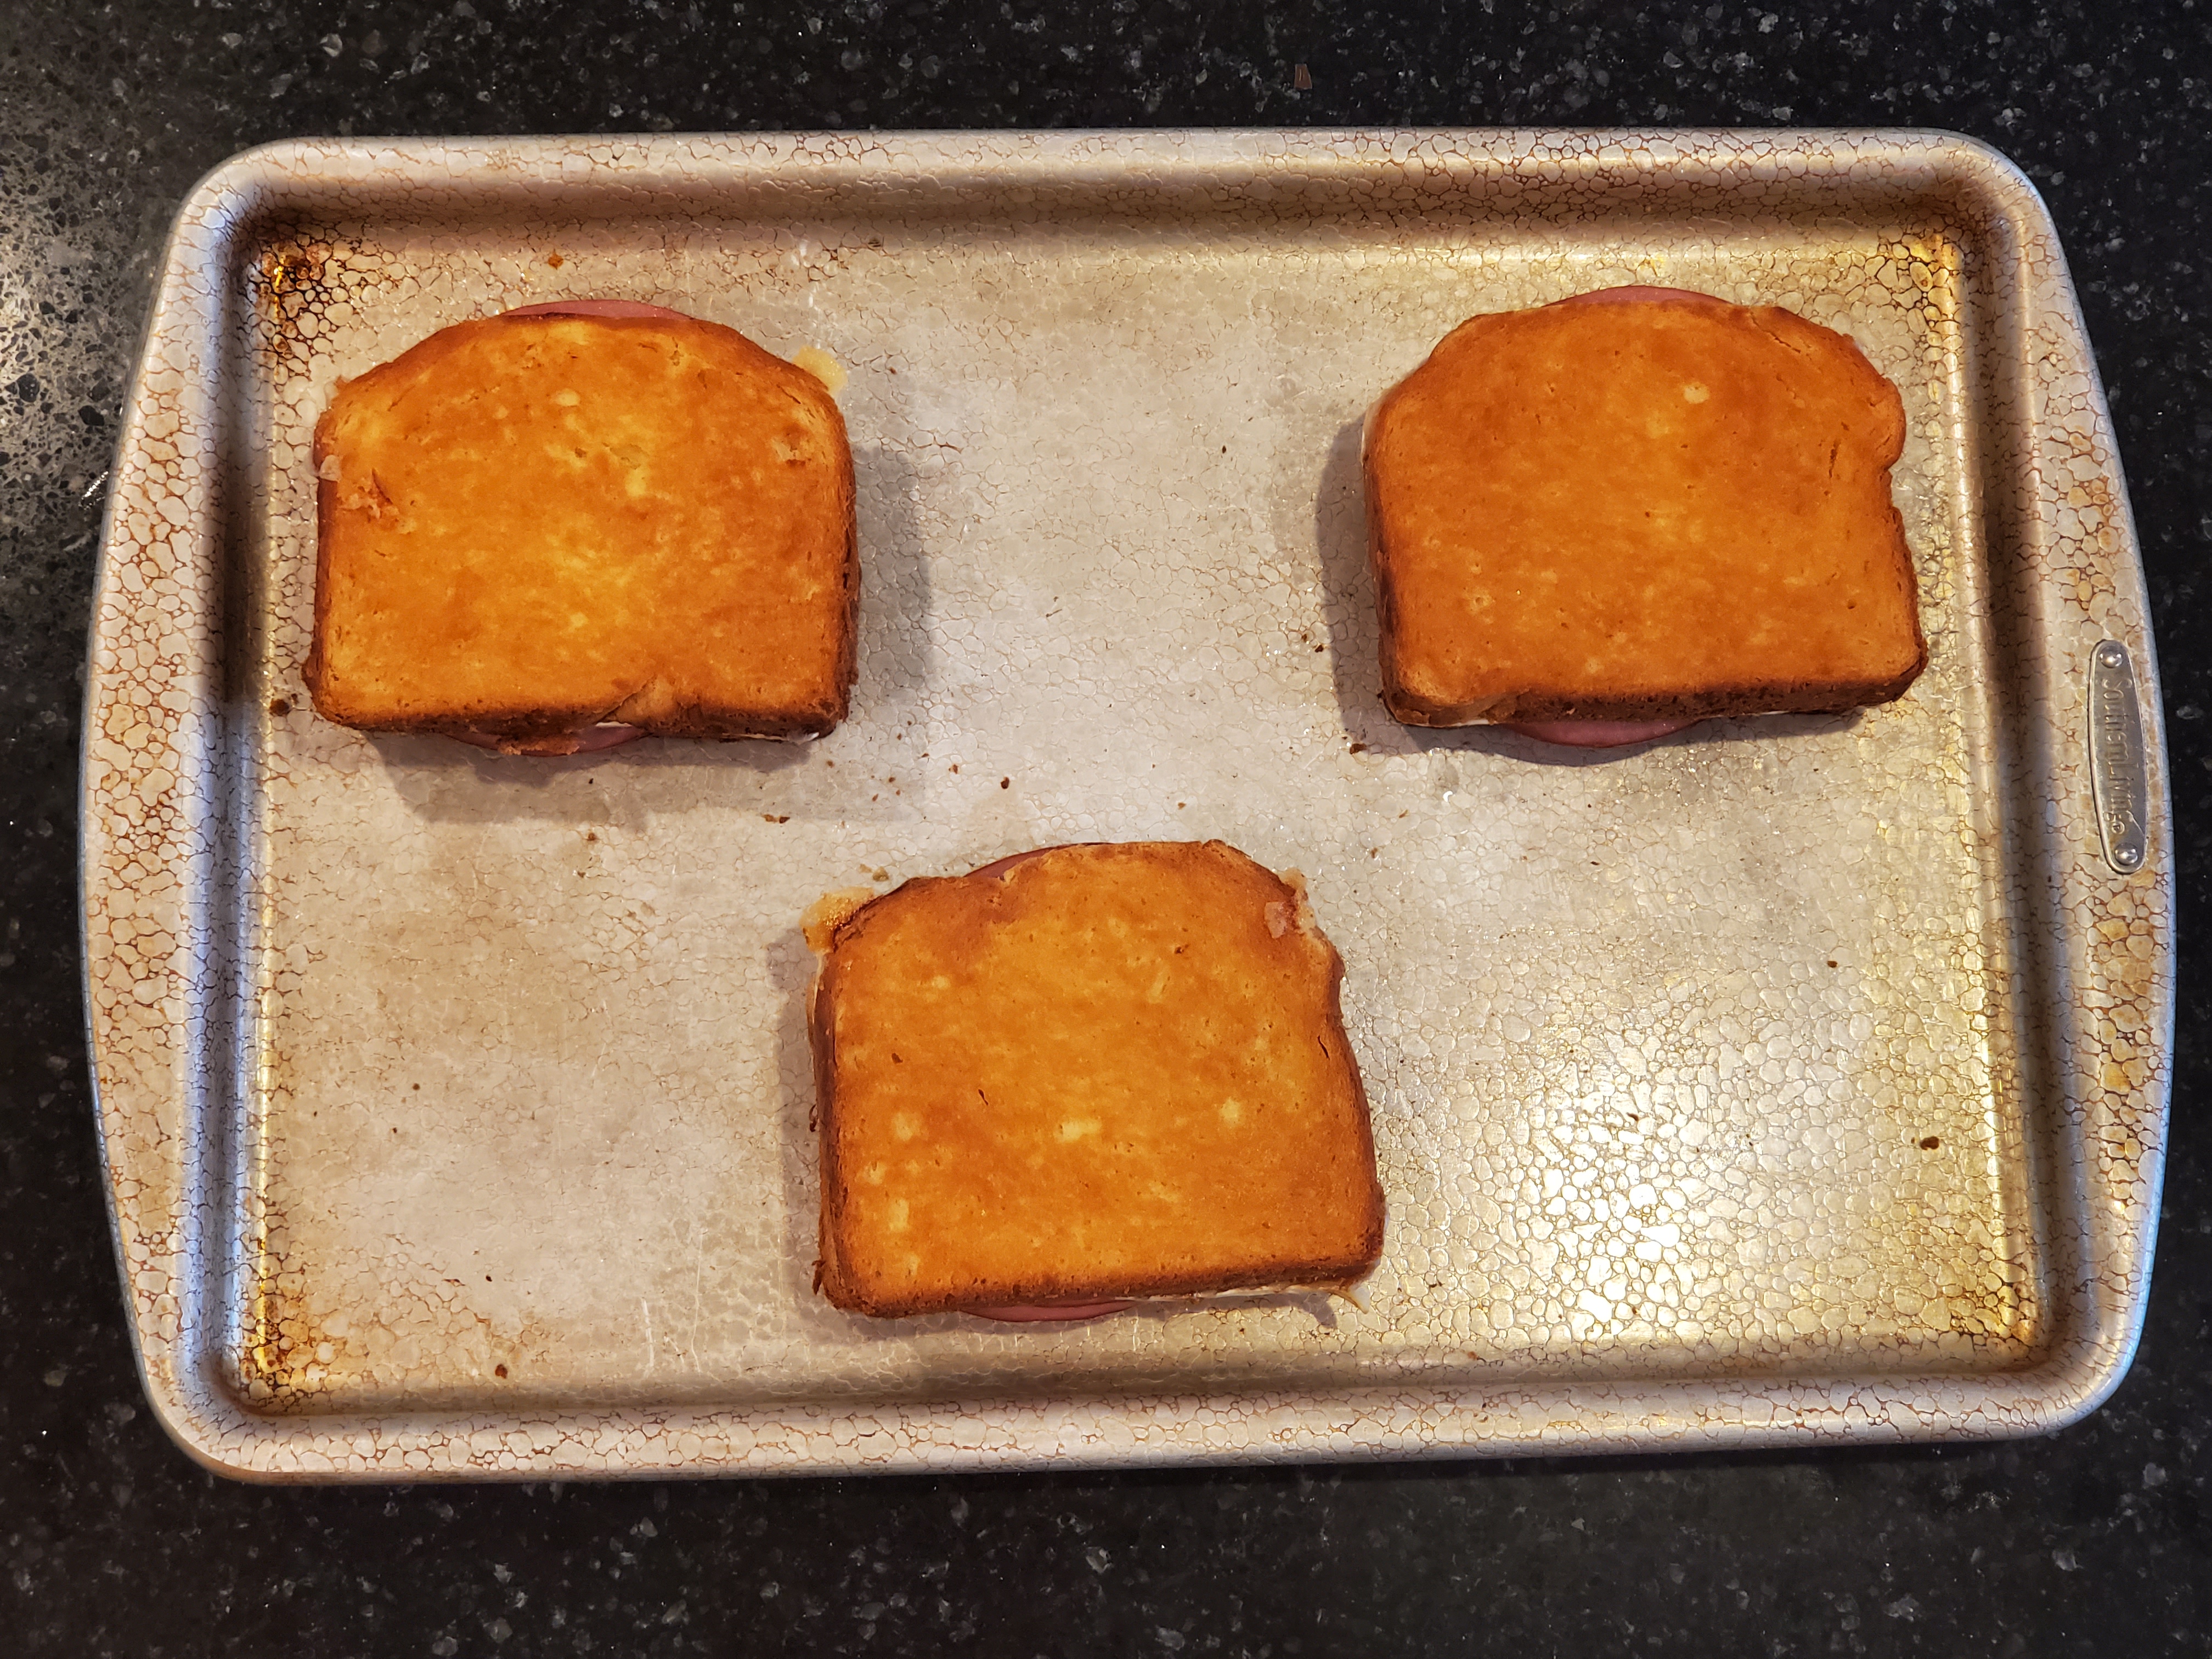 The three sandwiches have come out of the oven, golden brown and sit on the baking sheet.